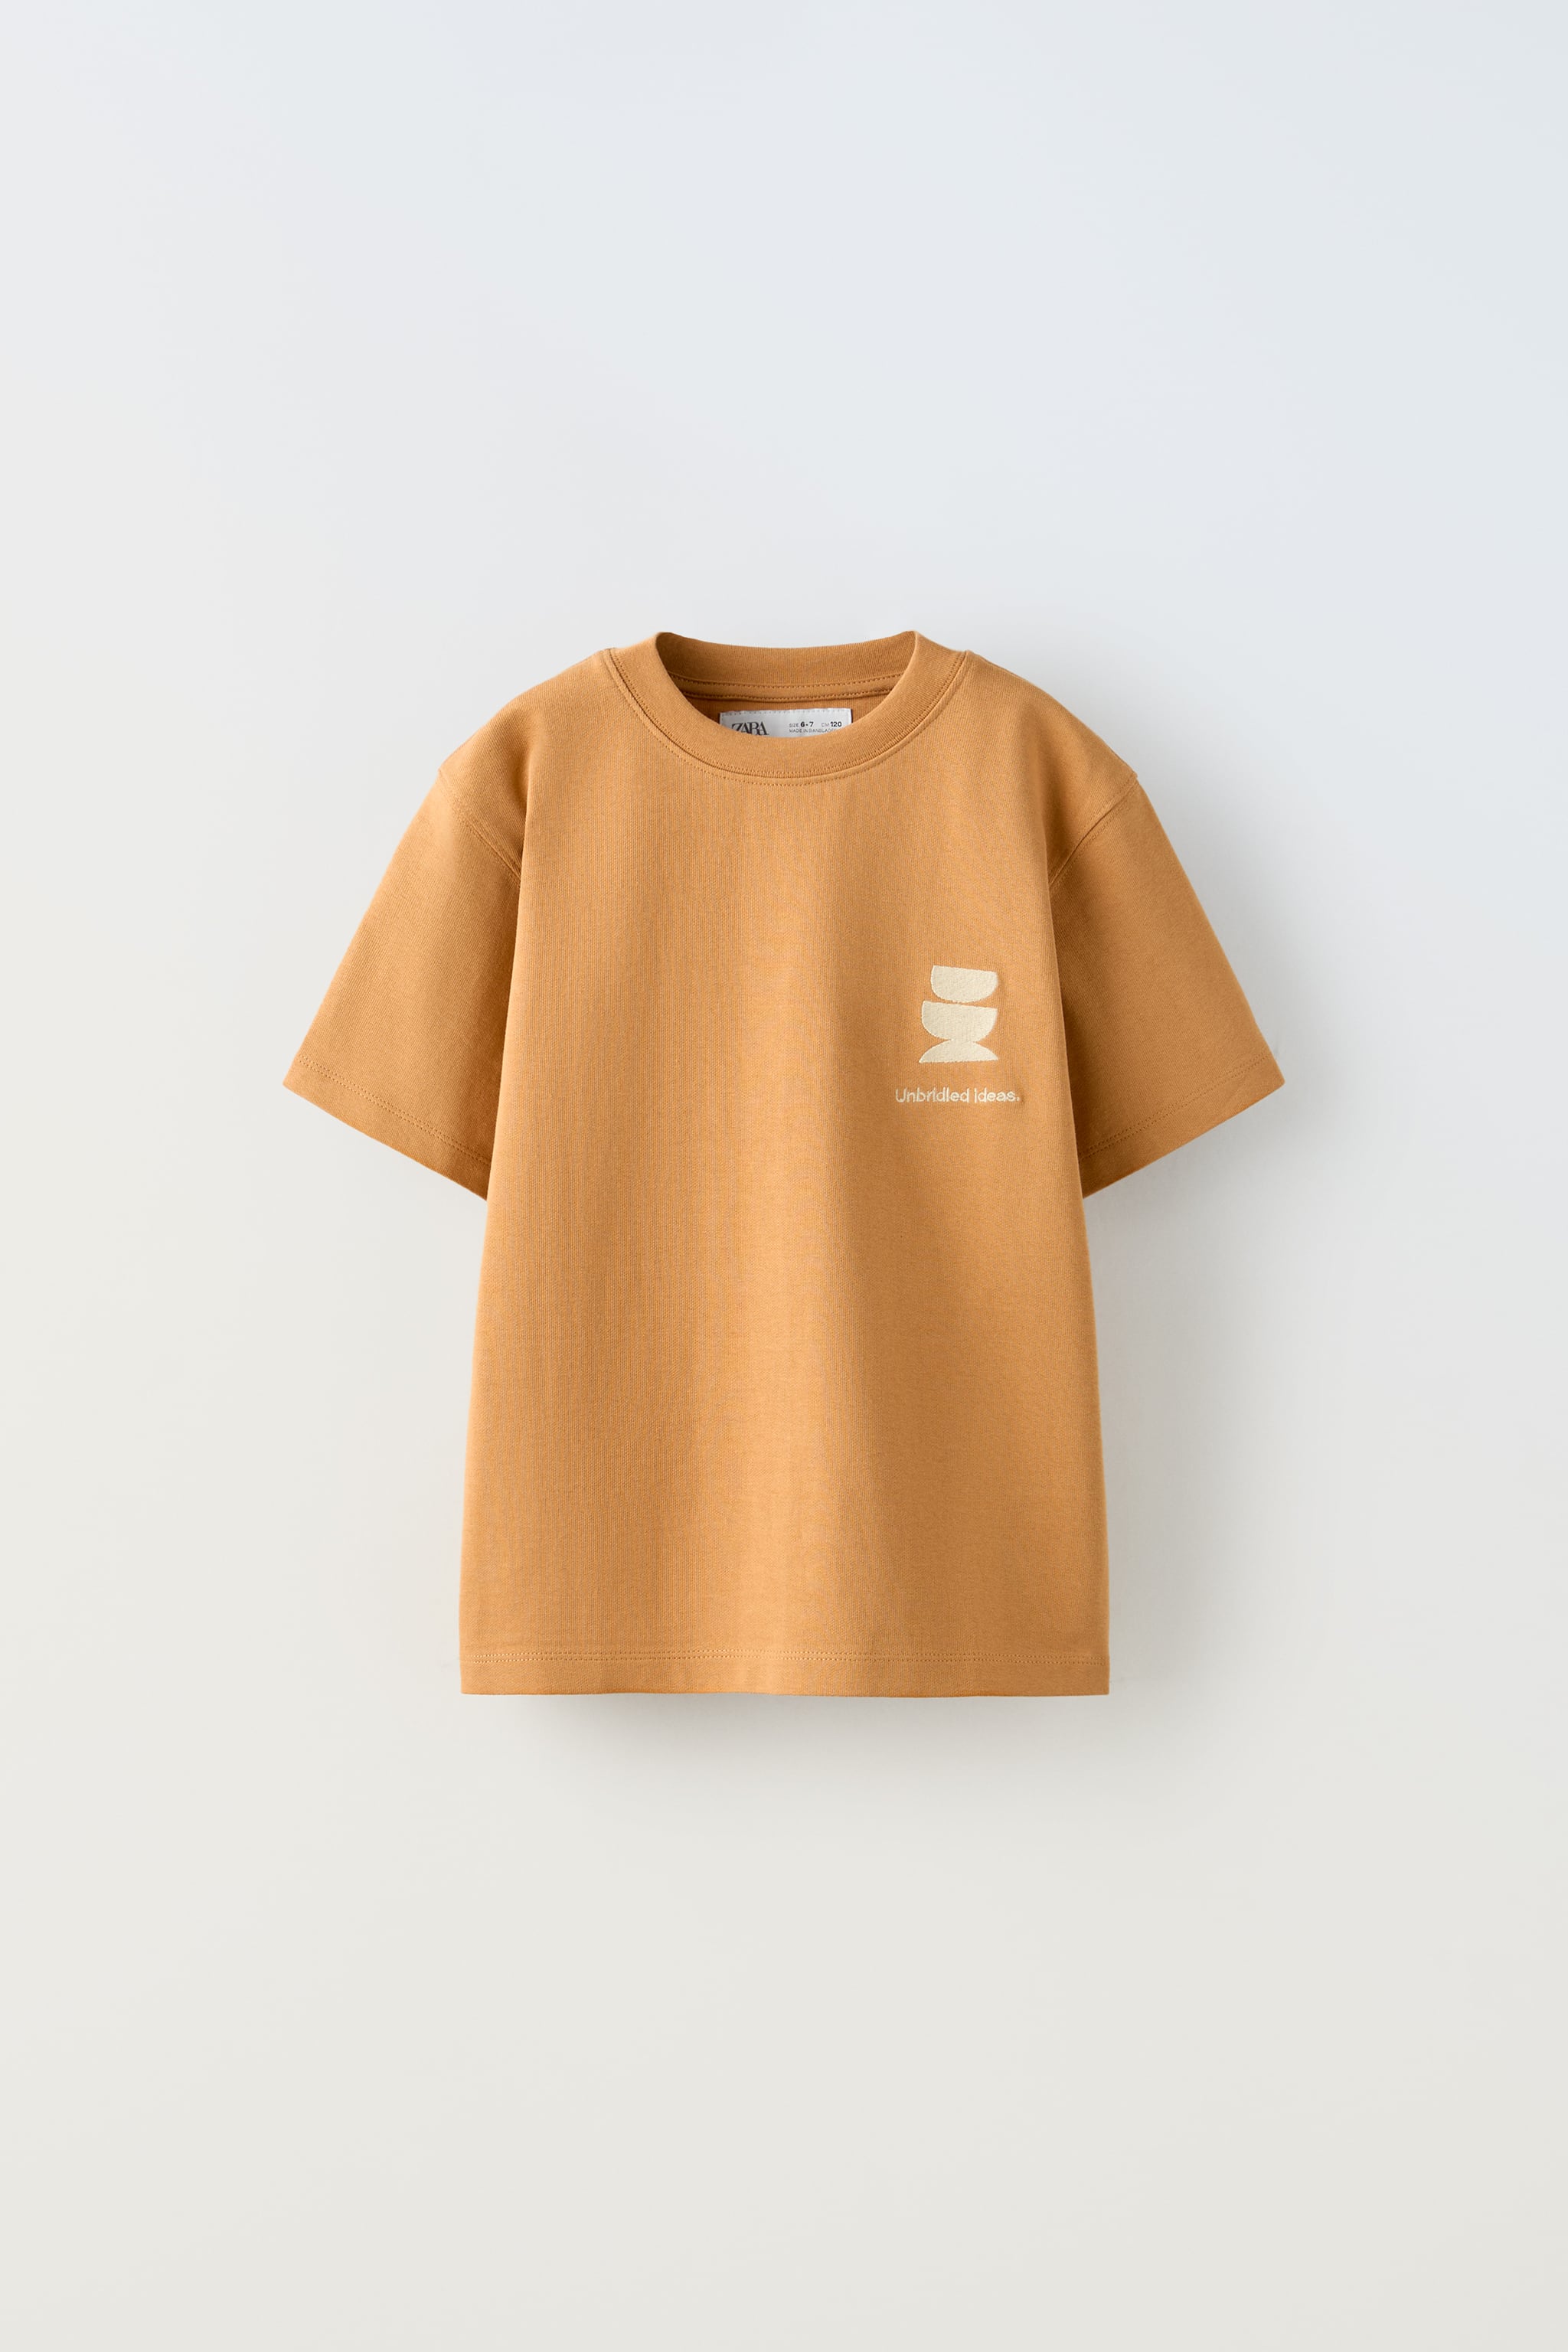 ABSTRACT EMBROIDERY T-SHIRT